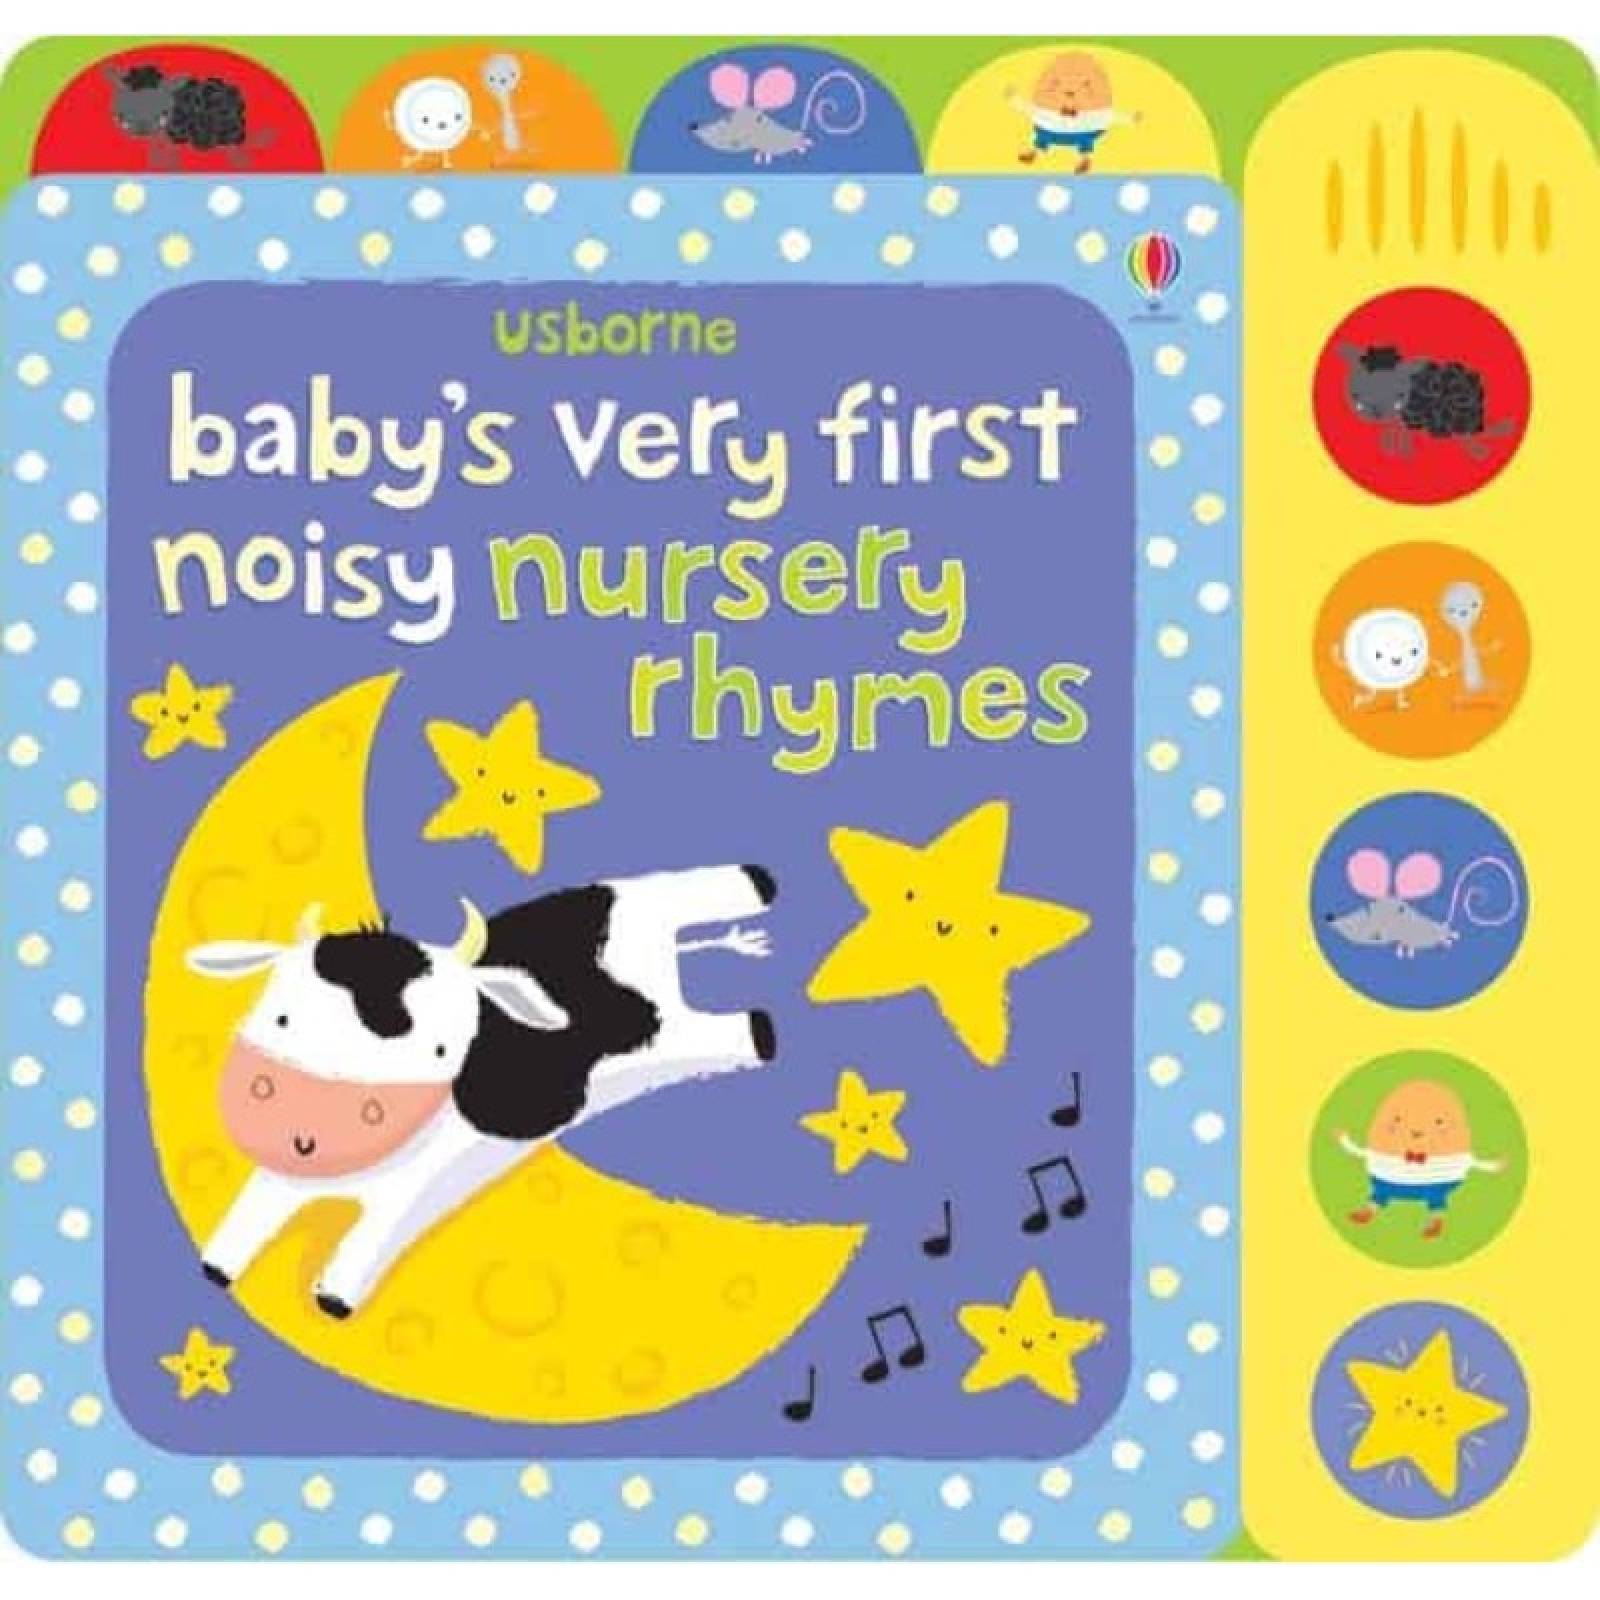 Baby's Very First Noisy Nursery Rhymes - Sound Book